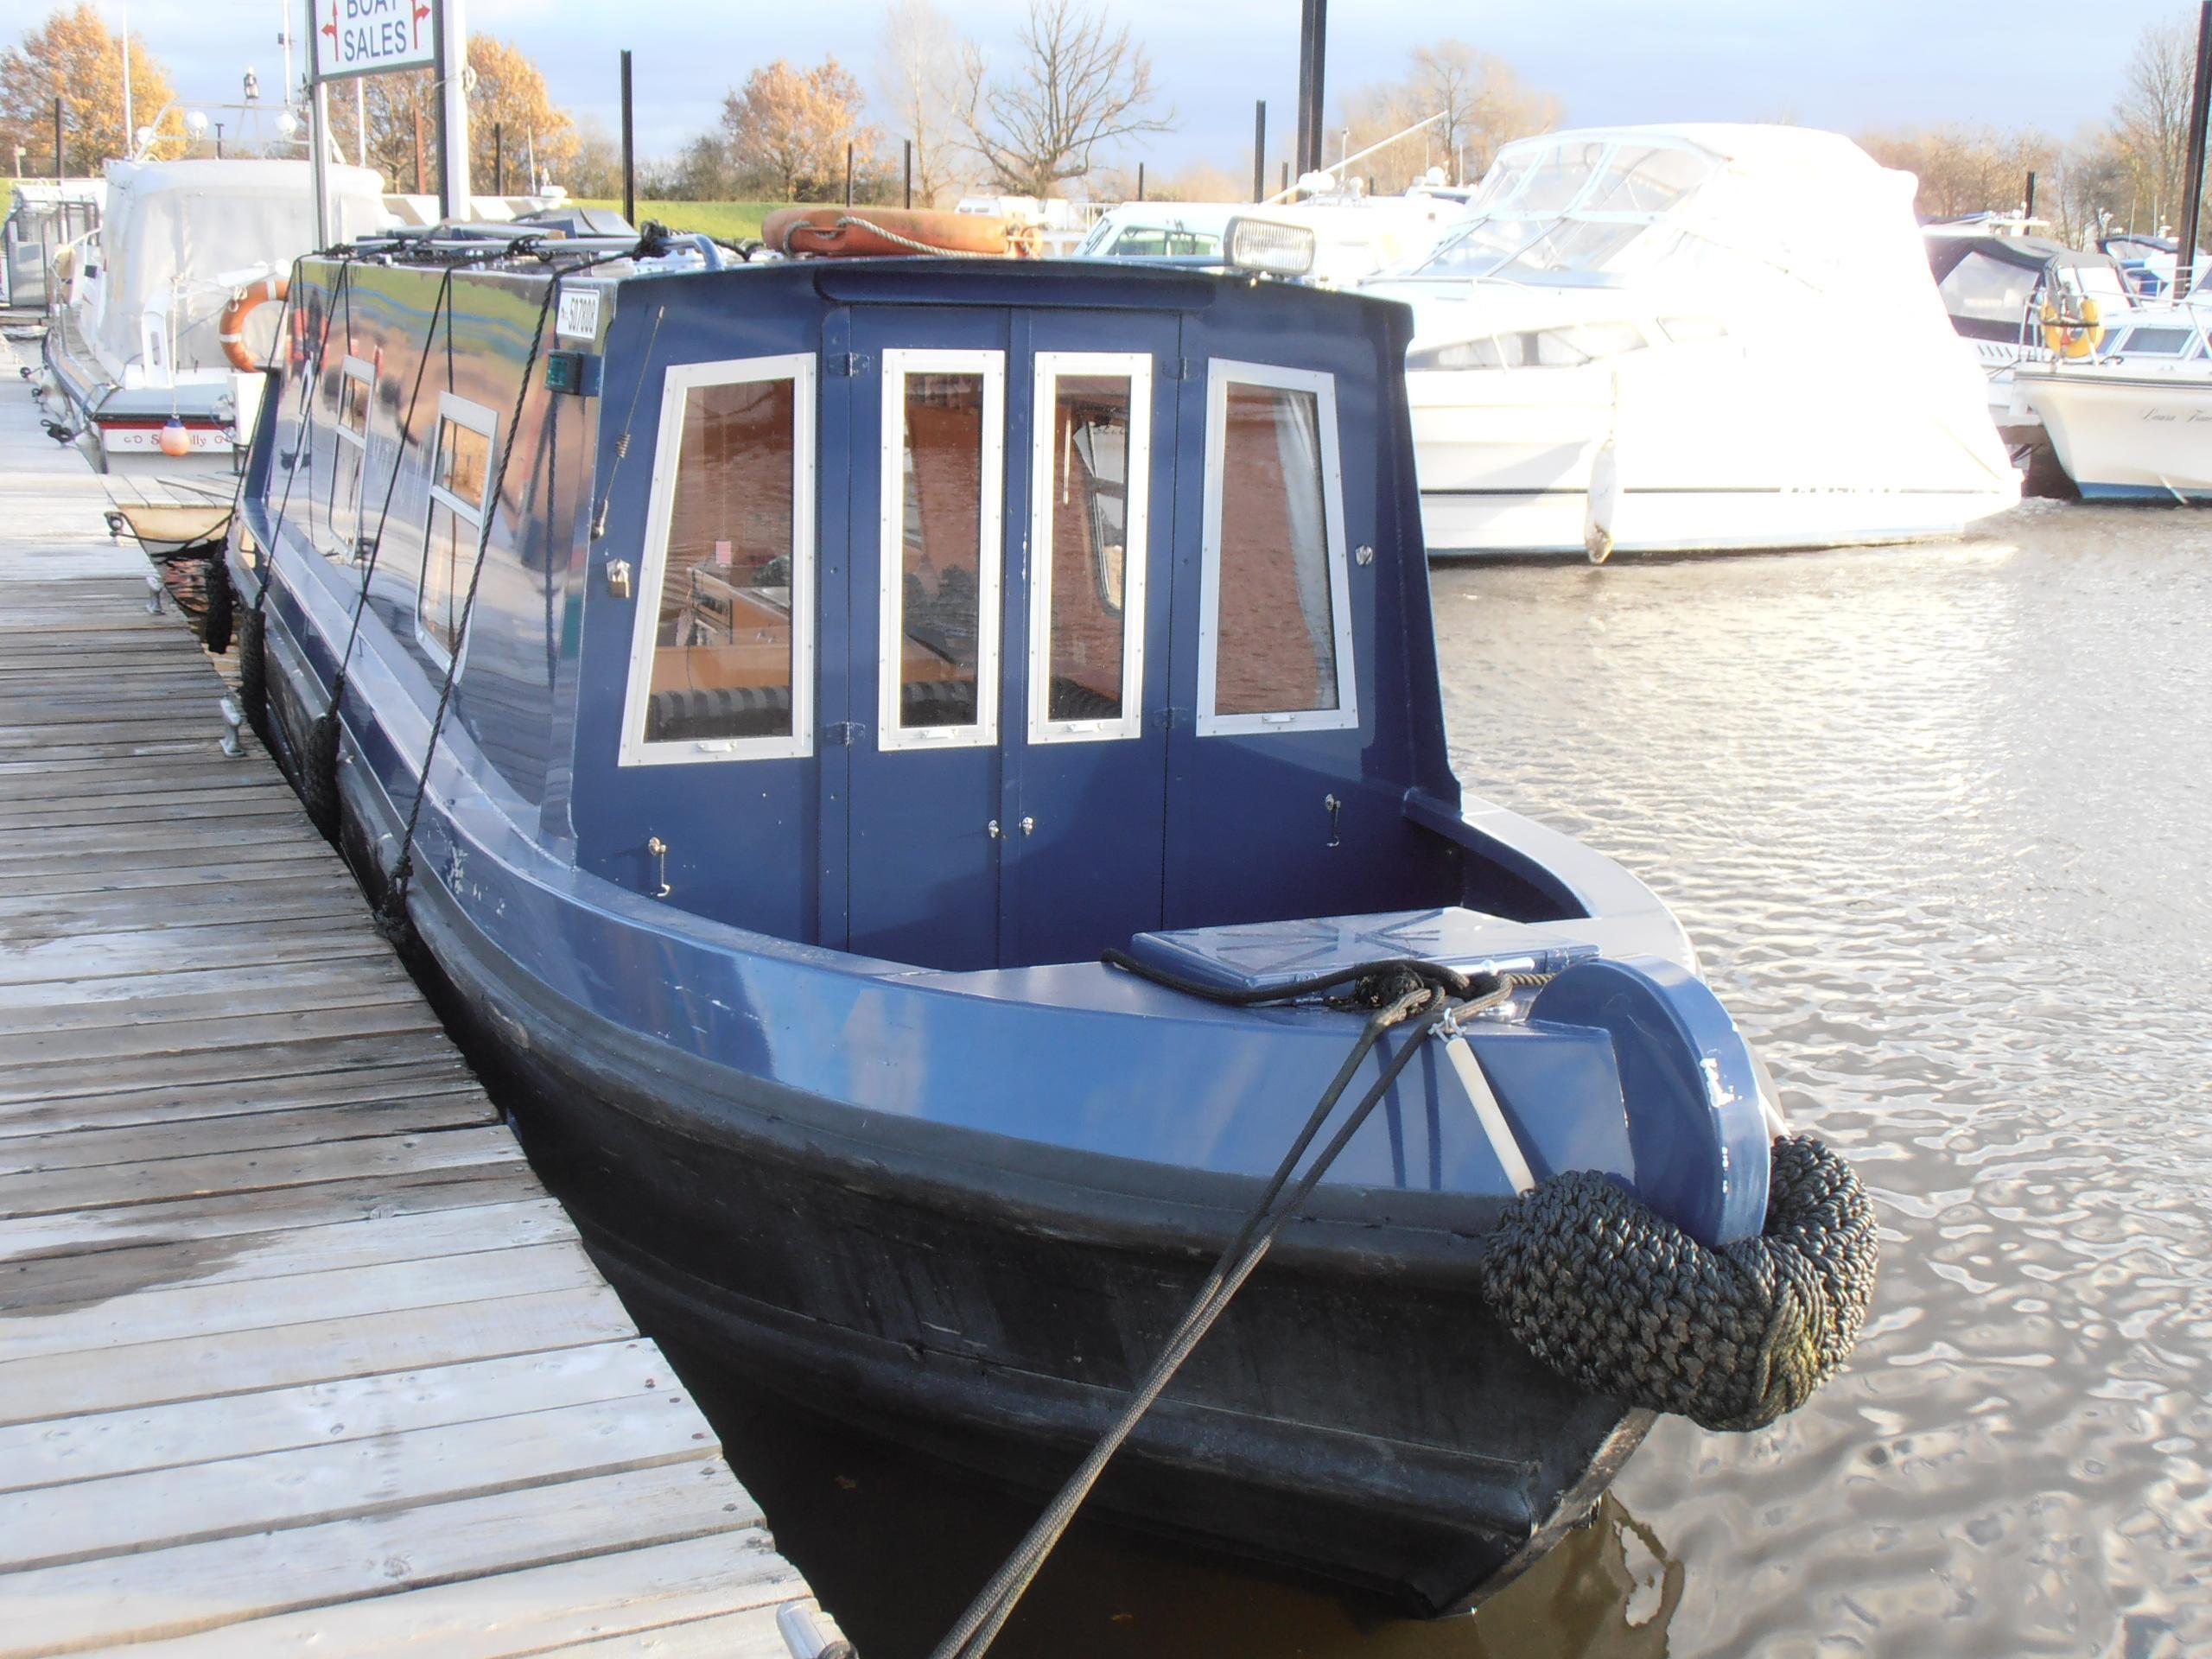 Sea Otter 31, River Severn - Upton, Worcestershire